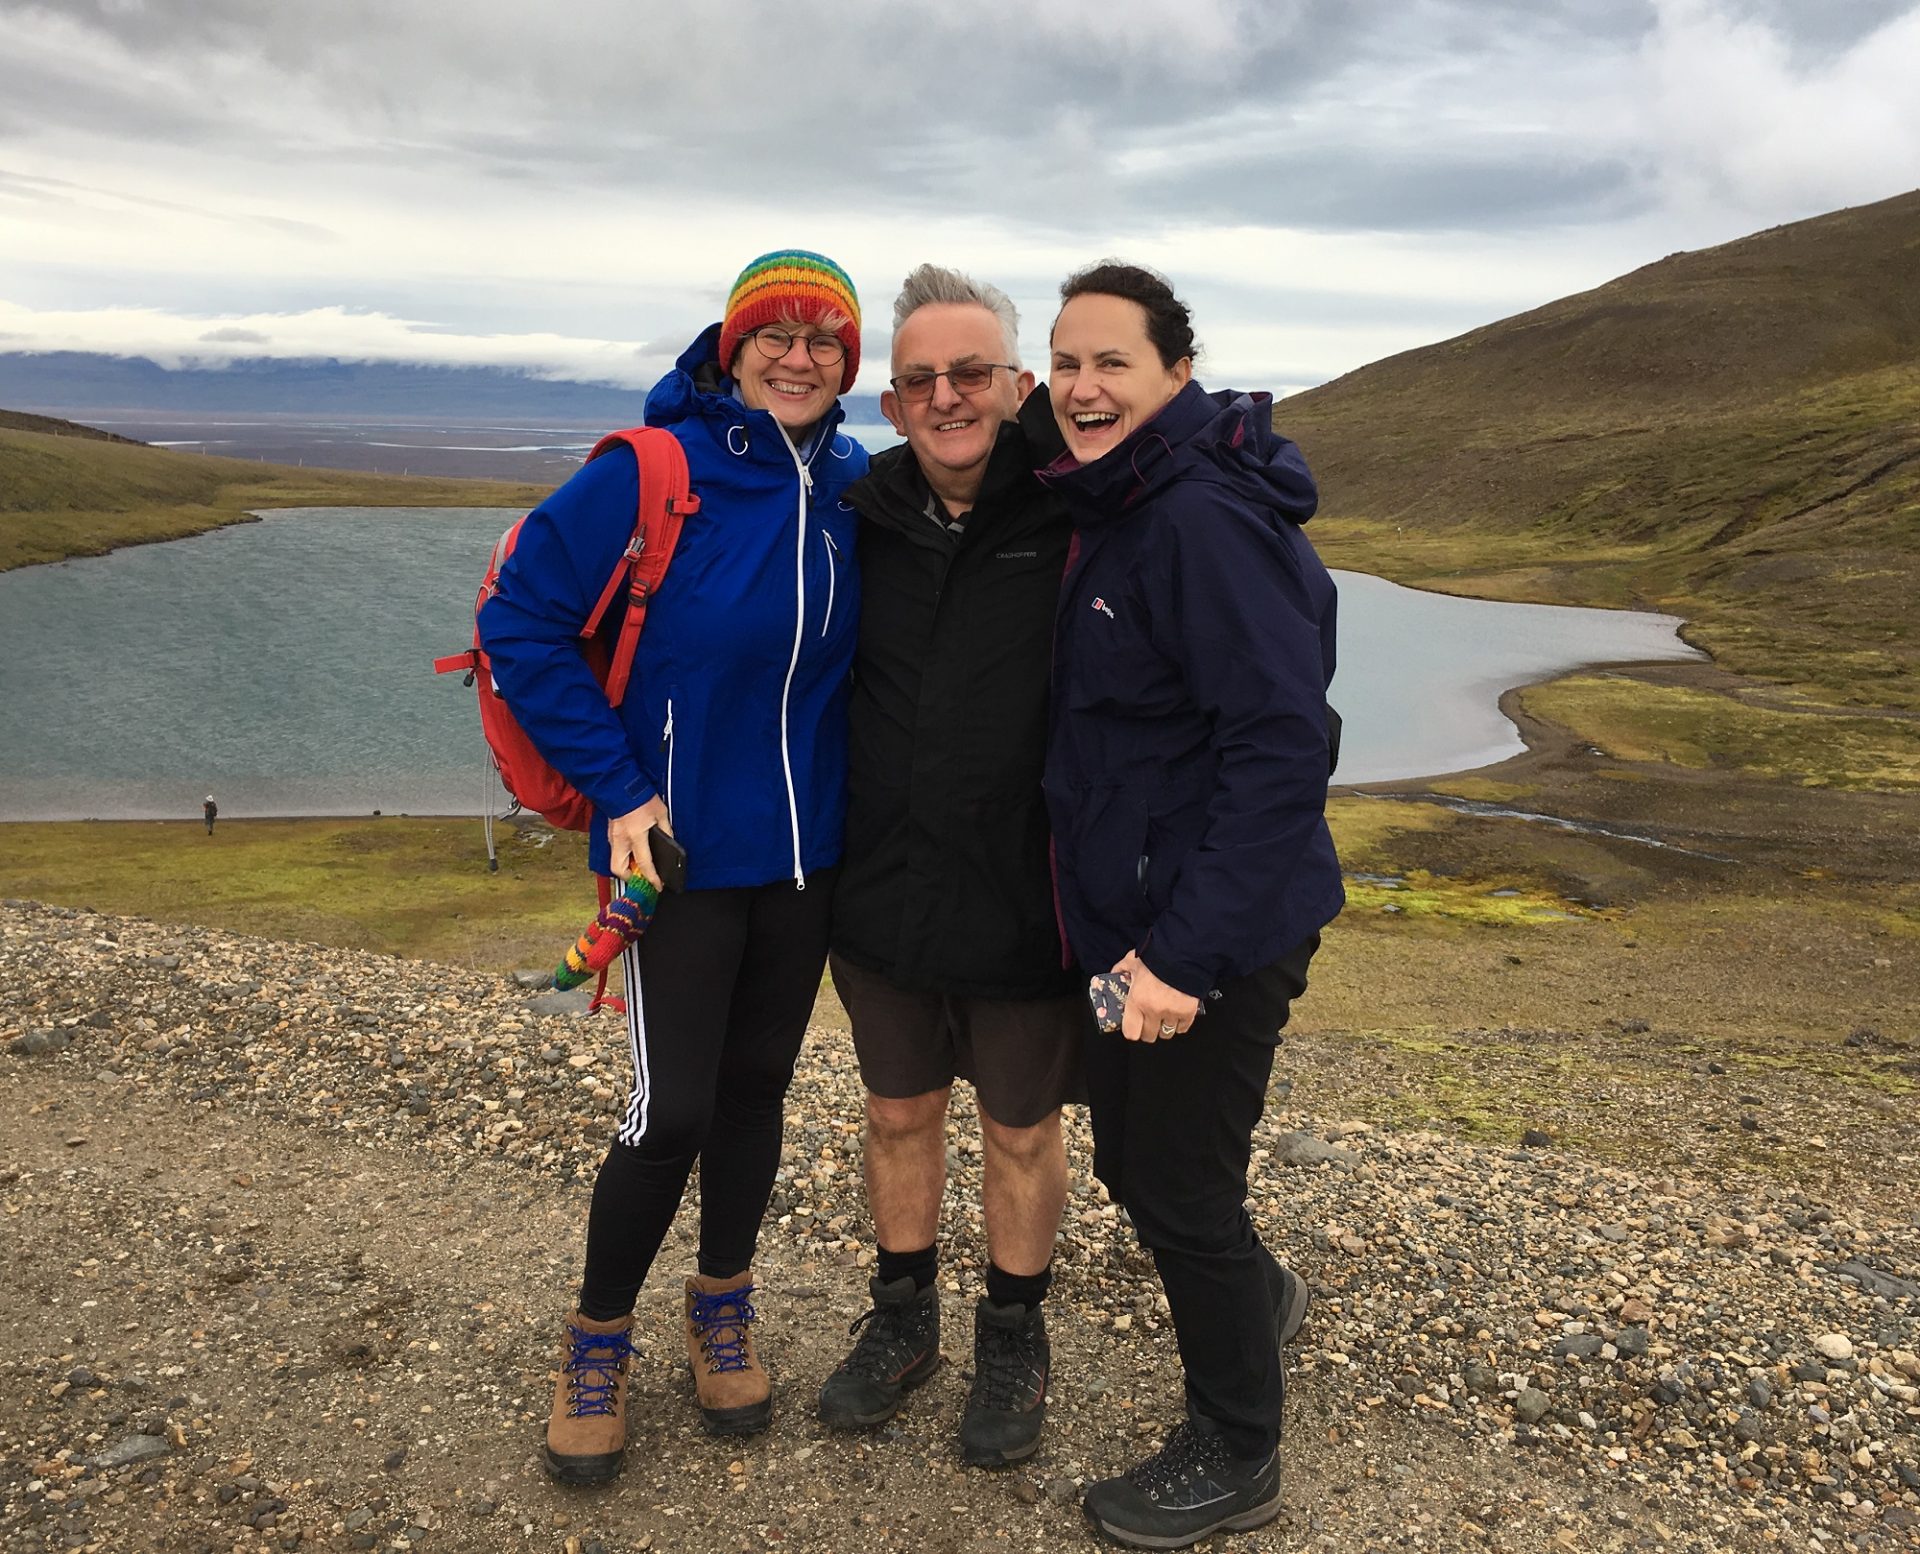 Gill Bevin, Francis House director of care, David Ireland Francis House CEO and Judith Ireland on a past trek to Iceland